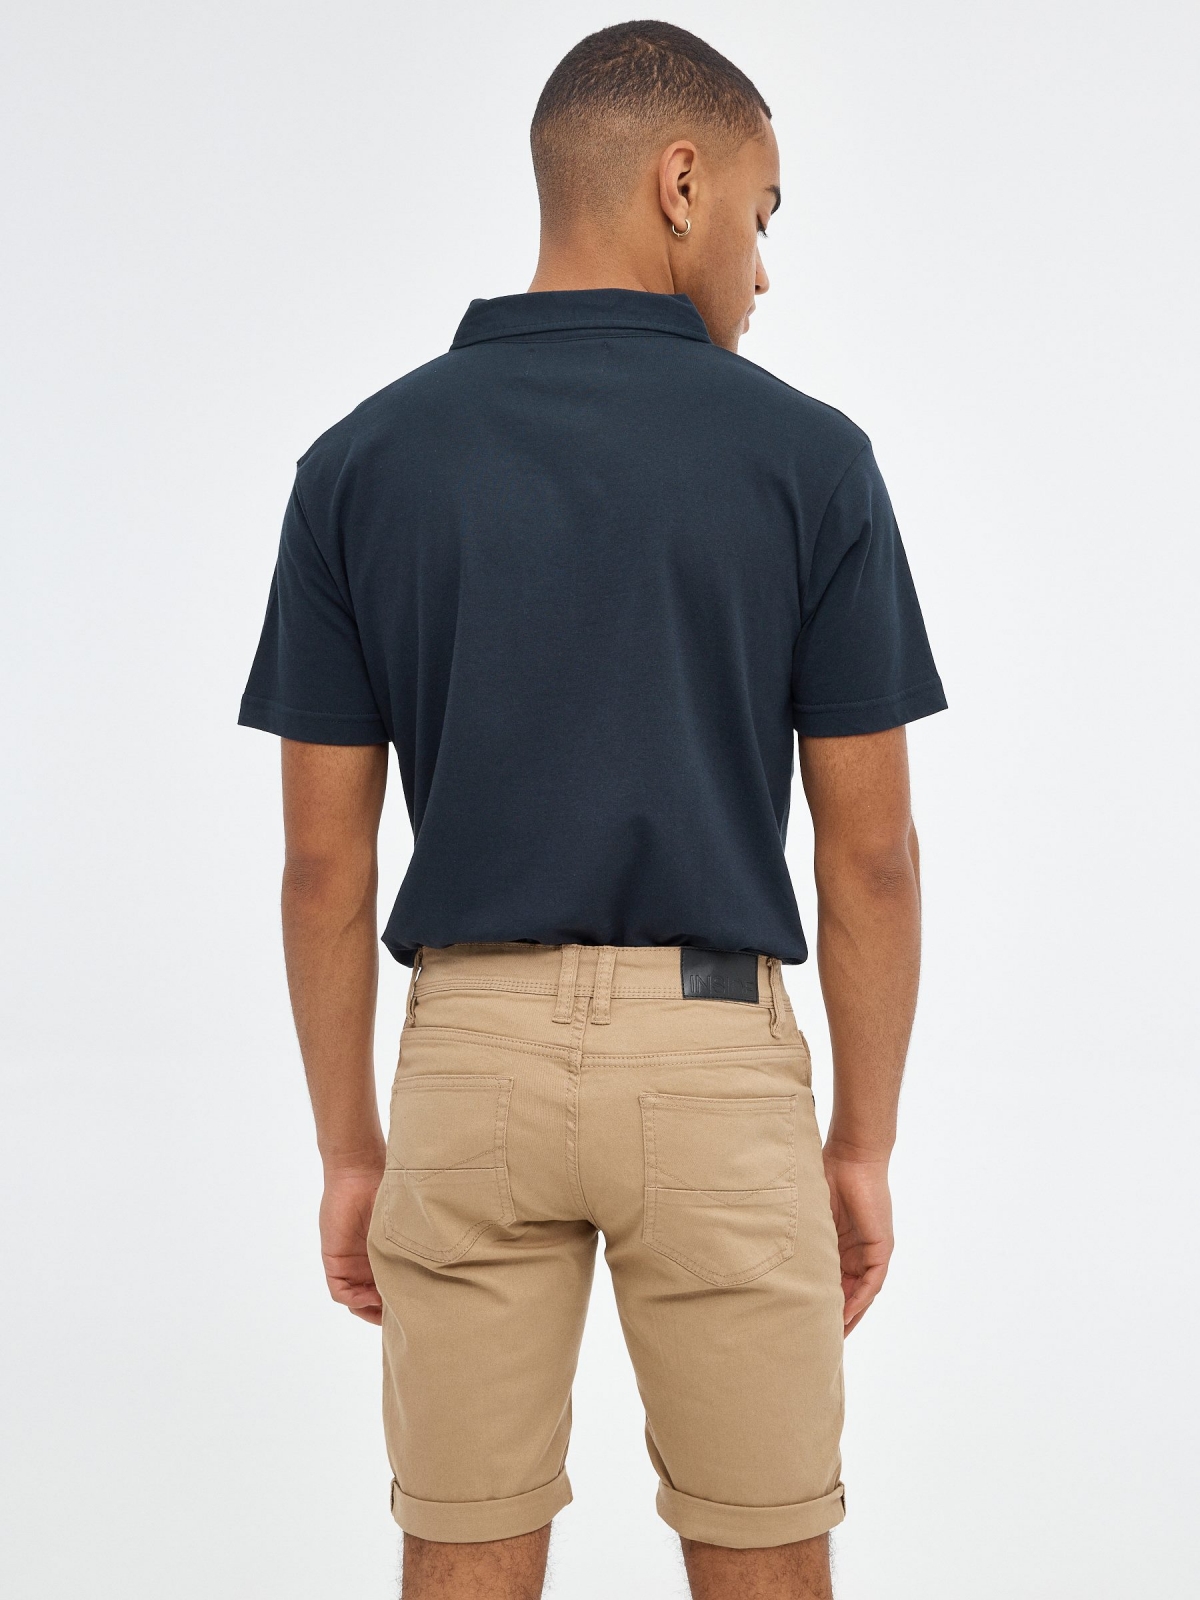 Bermuda short with five pockets beige middle back view